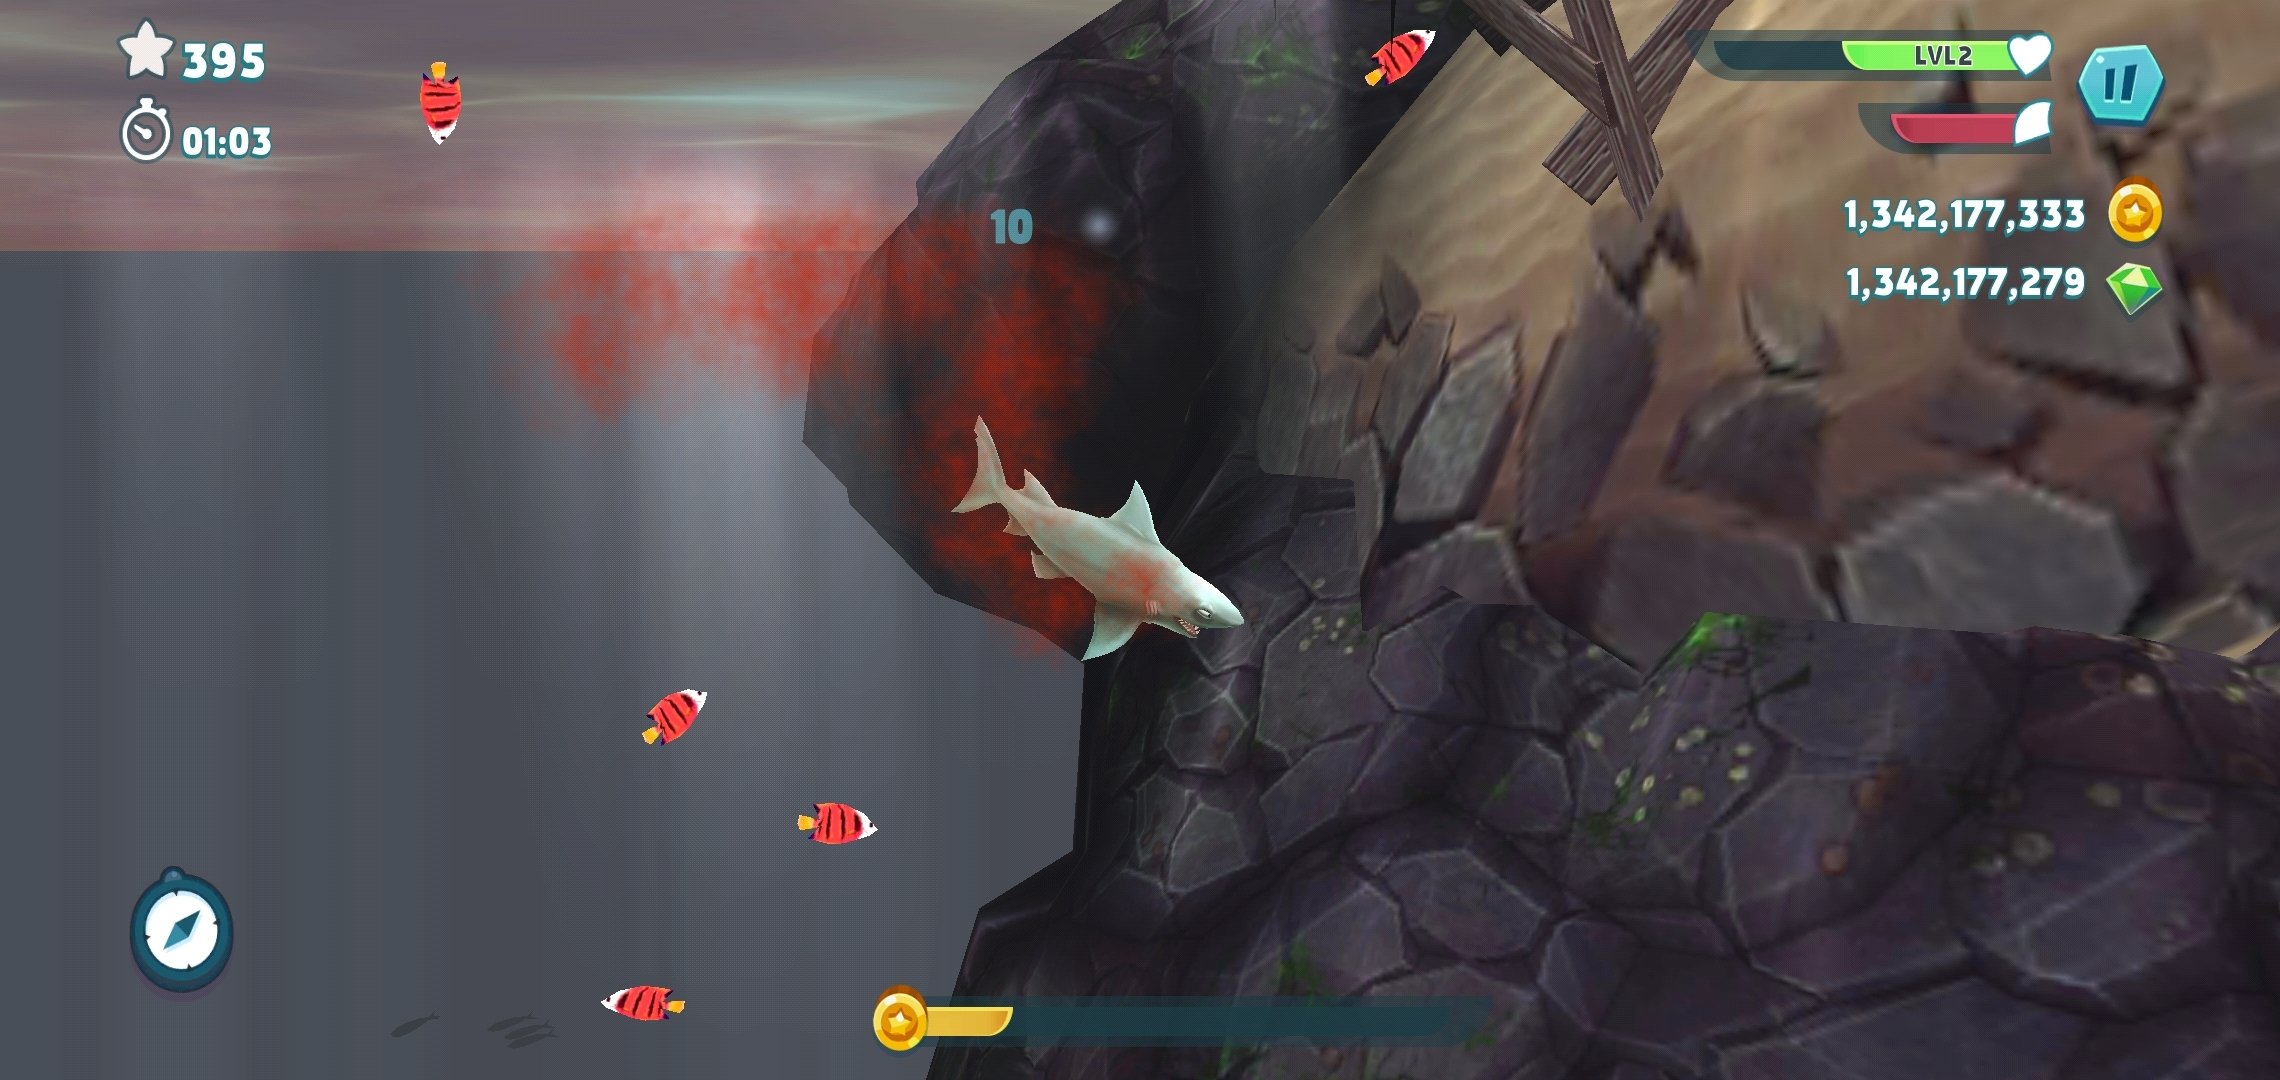 Hunting Shark 2023: Hungry Sea Monster for windows download free